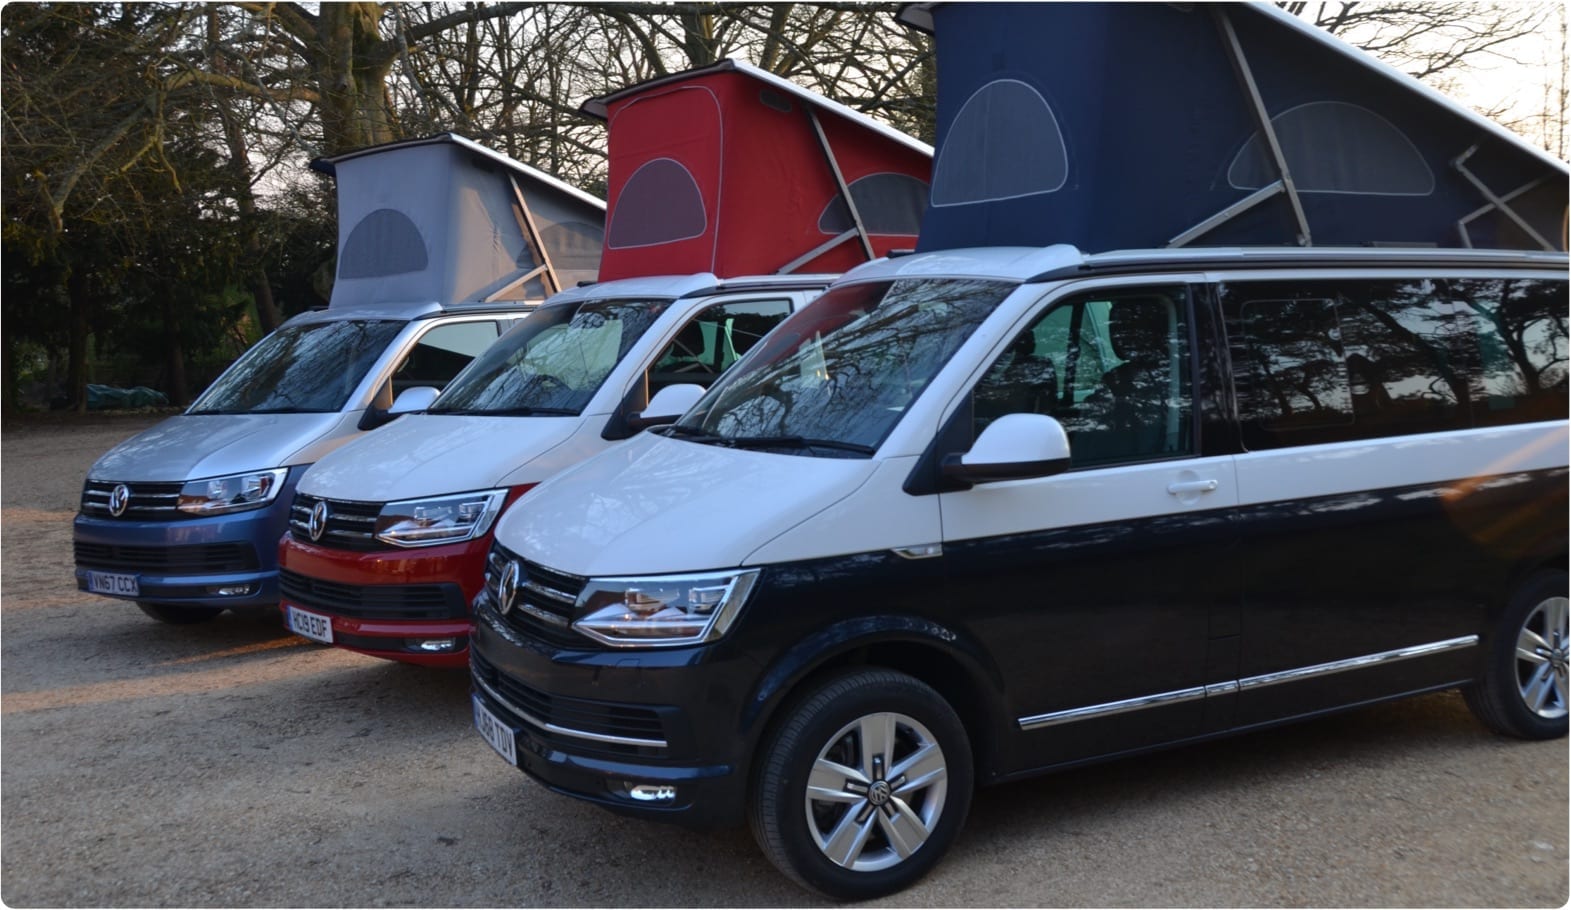 An image showing a range of VW campervans for hire in Southampton.